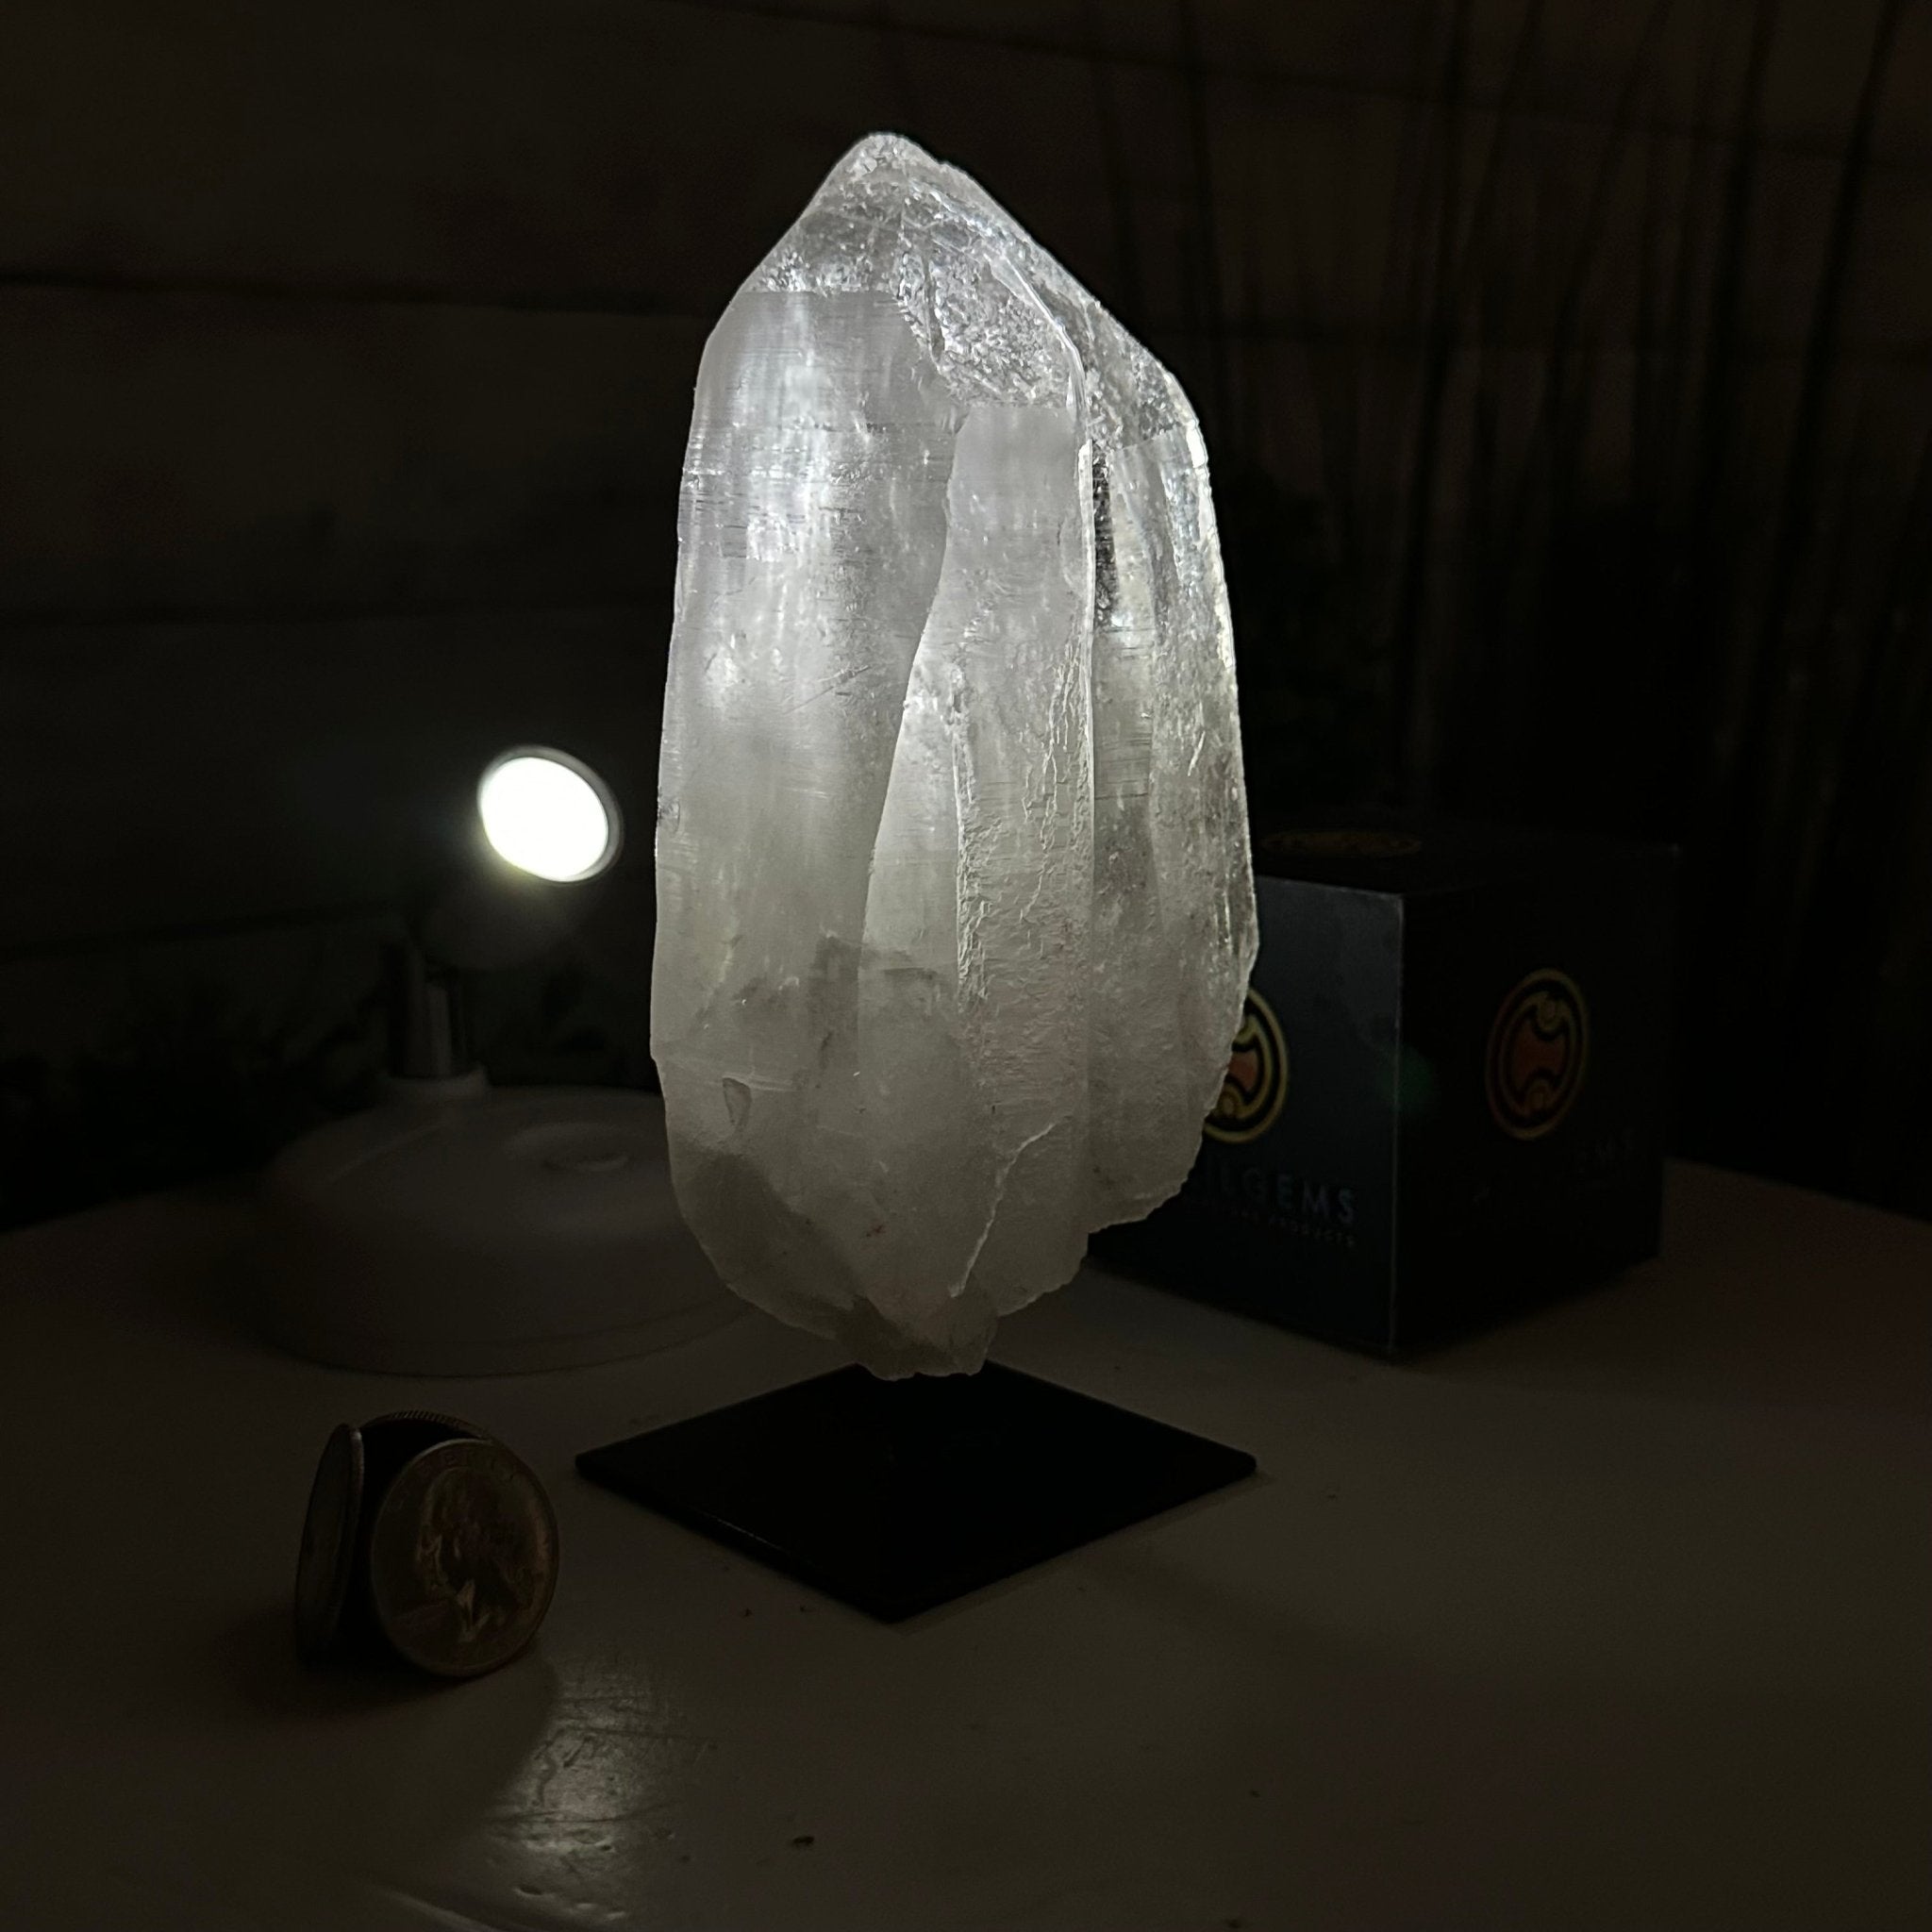 Clear Quartz Crystal Point on Fixed Base, 1.8 lbs & 6.4" Tall #3122CQ-005 - Brazil GemsBrazil GemsClear Quartz Crystal Point on Fixed Base, 1.8 lbs & 6.4" Tall #3122CQ-005Crystal Points3122CQ-005